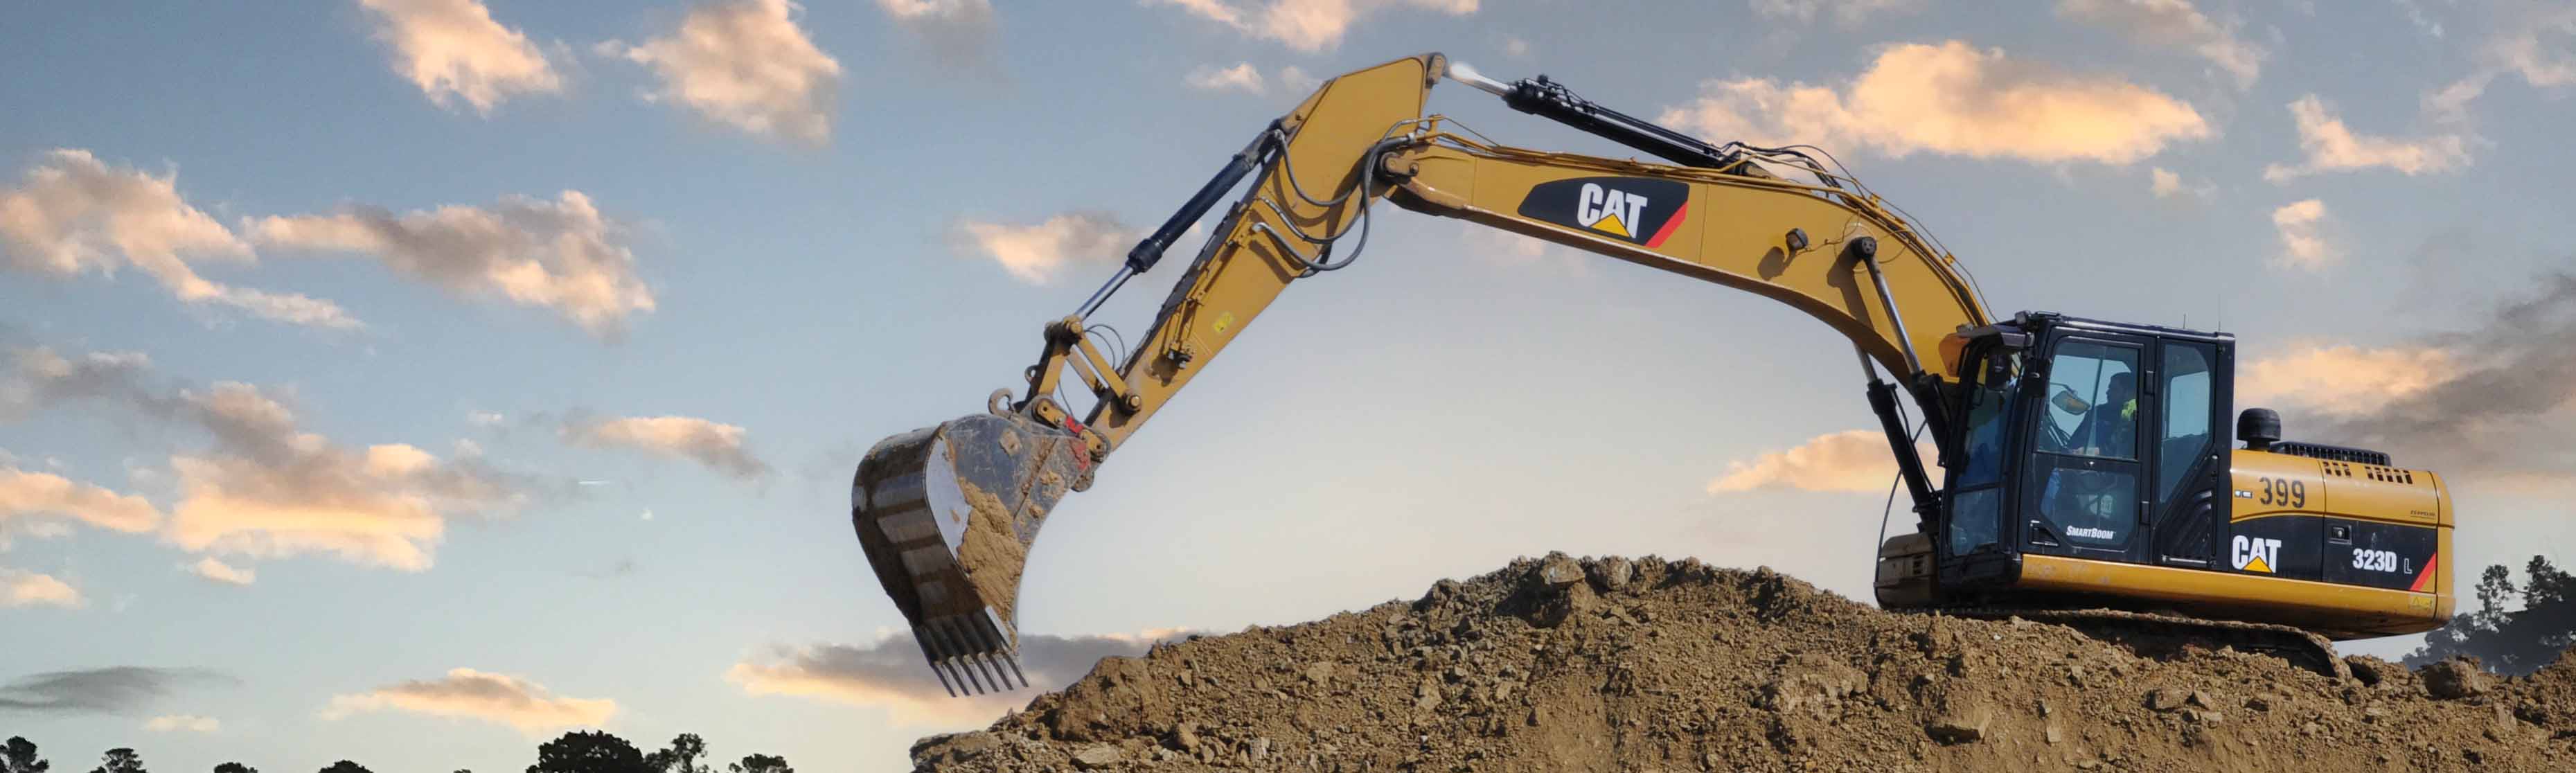 A photograph of a CAT excavator